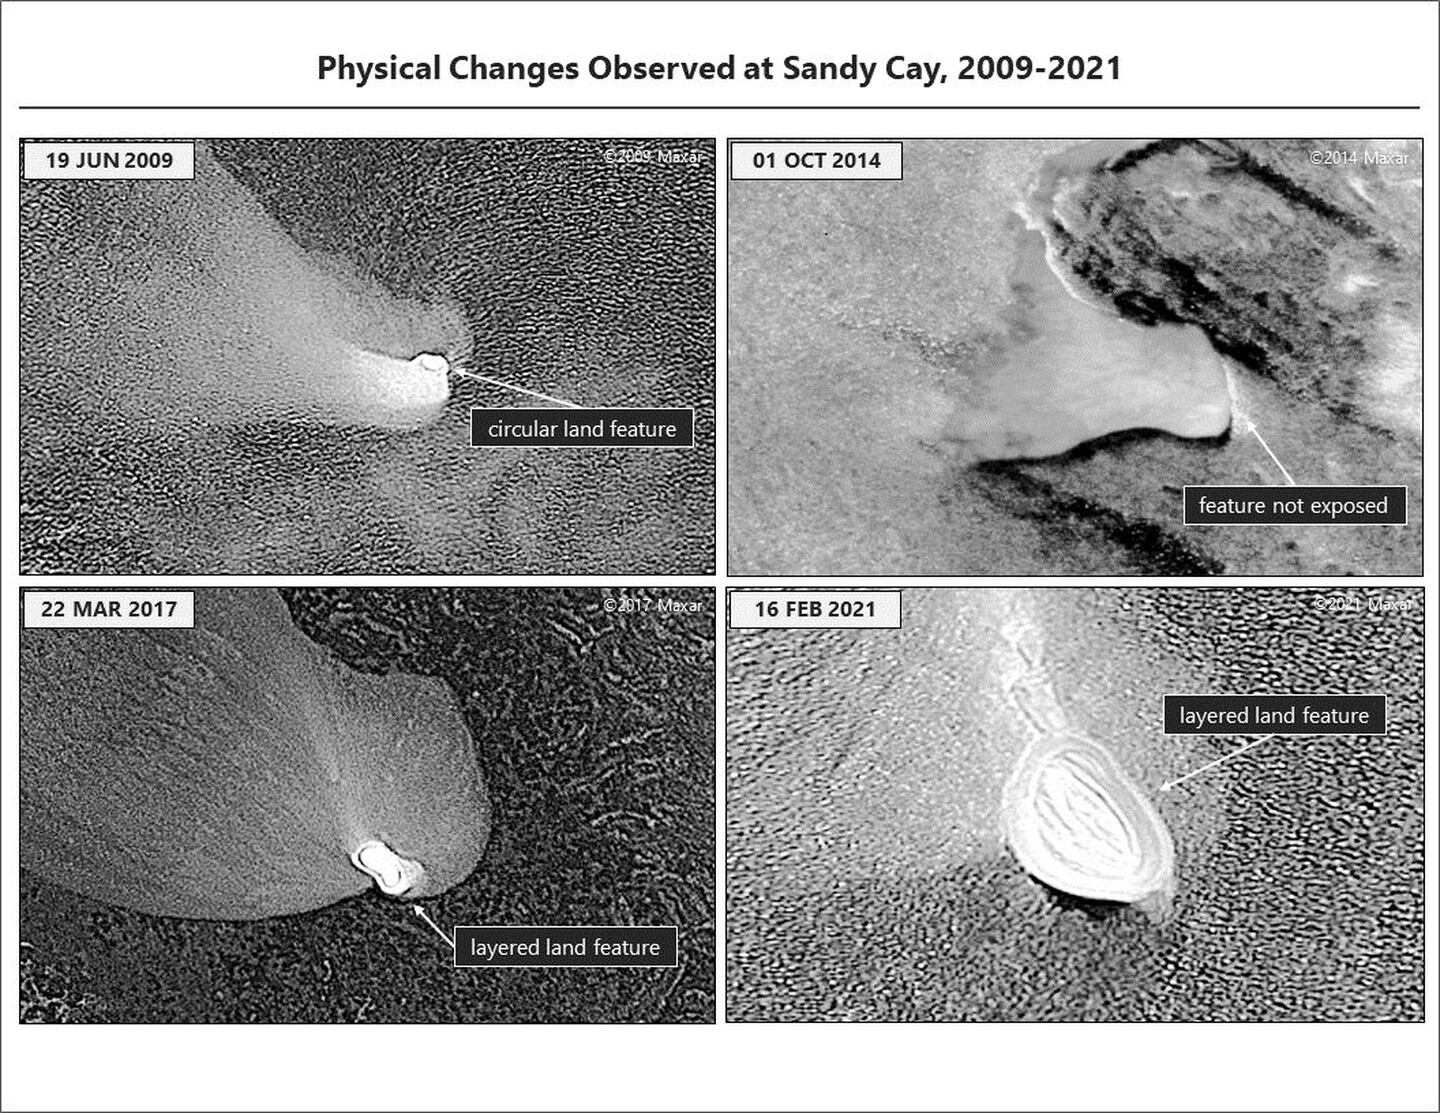 Satellite images obtained by Bloomberg News depict physical changes to a layered land feature at Sandy Cay between 2009 and 2021.dfd